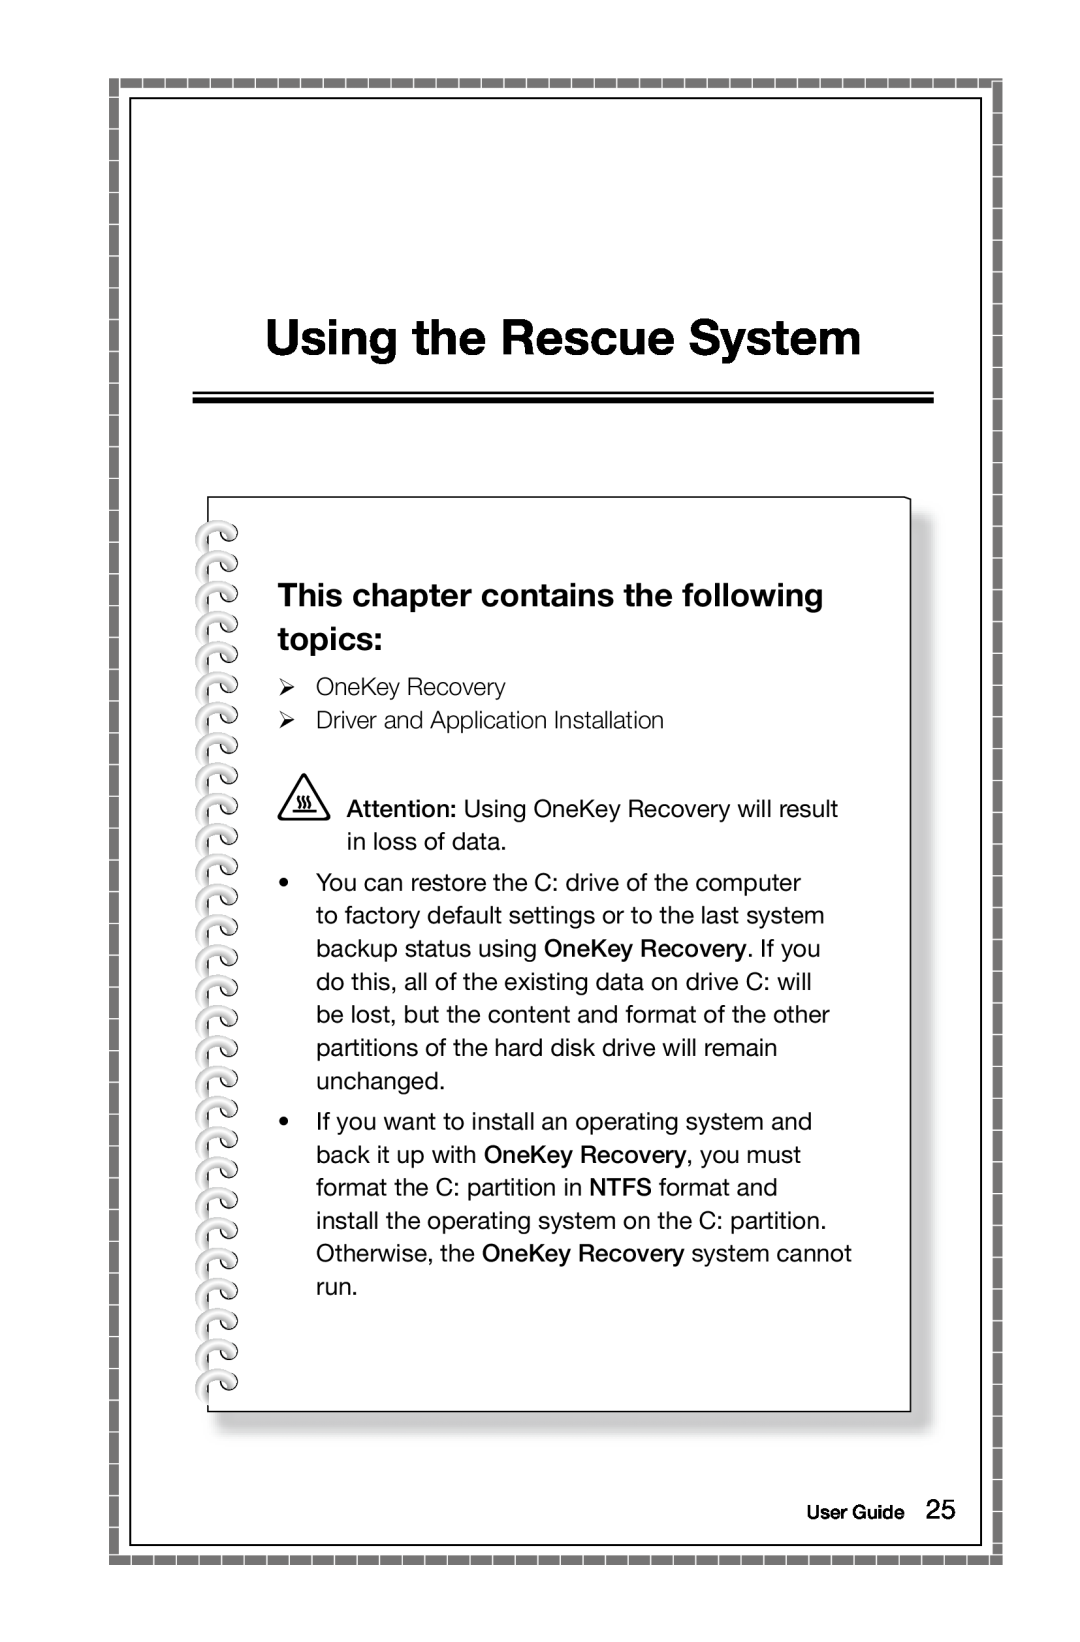 Lenovo 10121/90A1 [K450 ES], 10120/90A0 [K450 NON-ES] Using the Rescue System, This chapter contains the following topics 